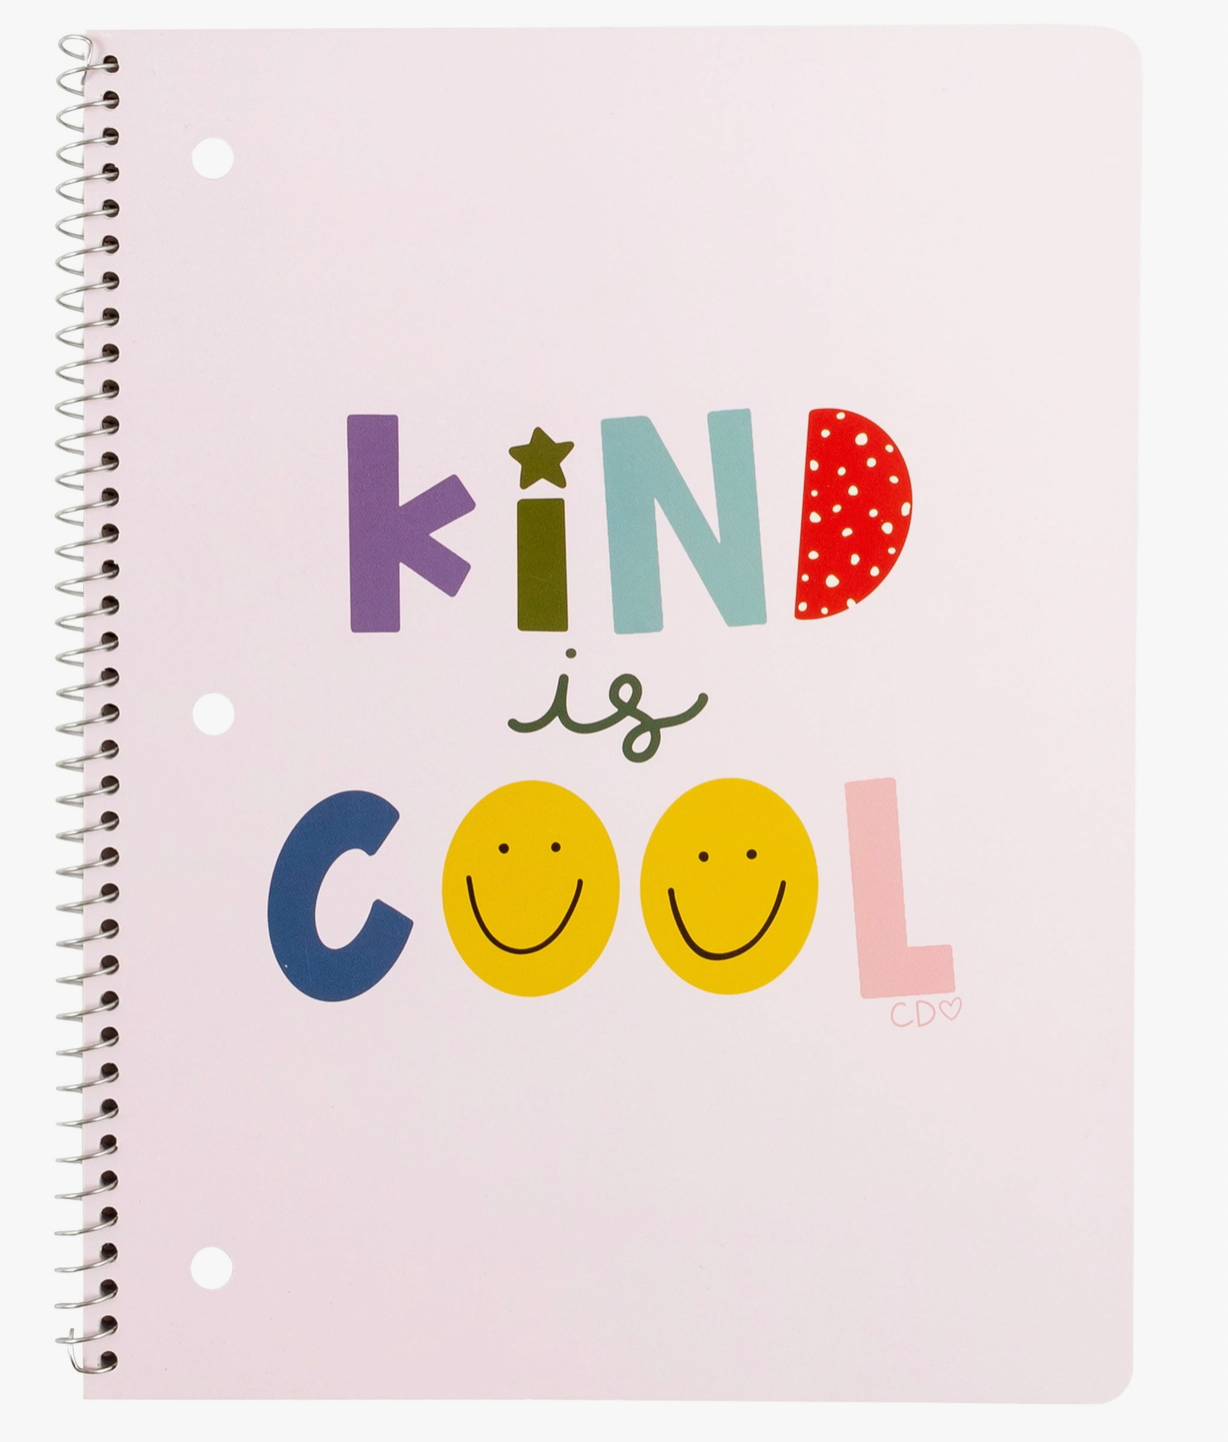 Kind is Cool Spiral Notebook